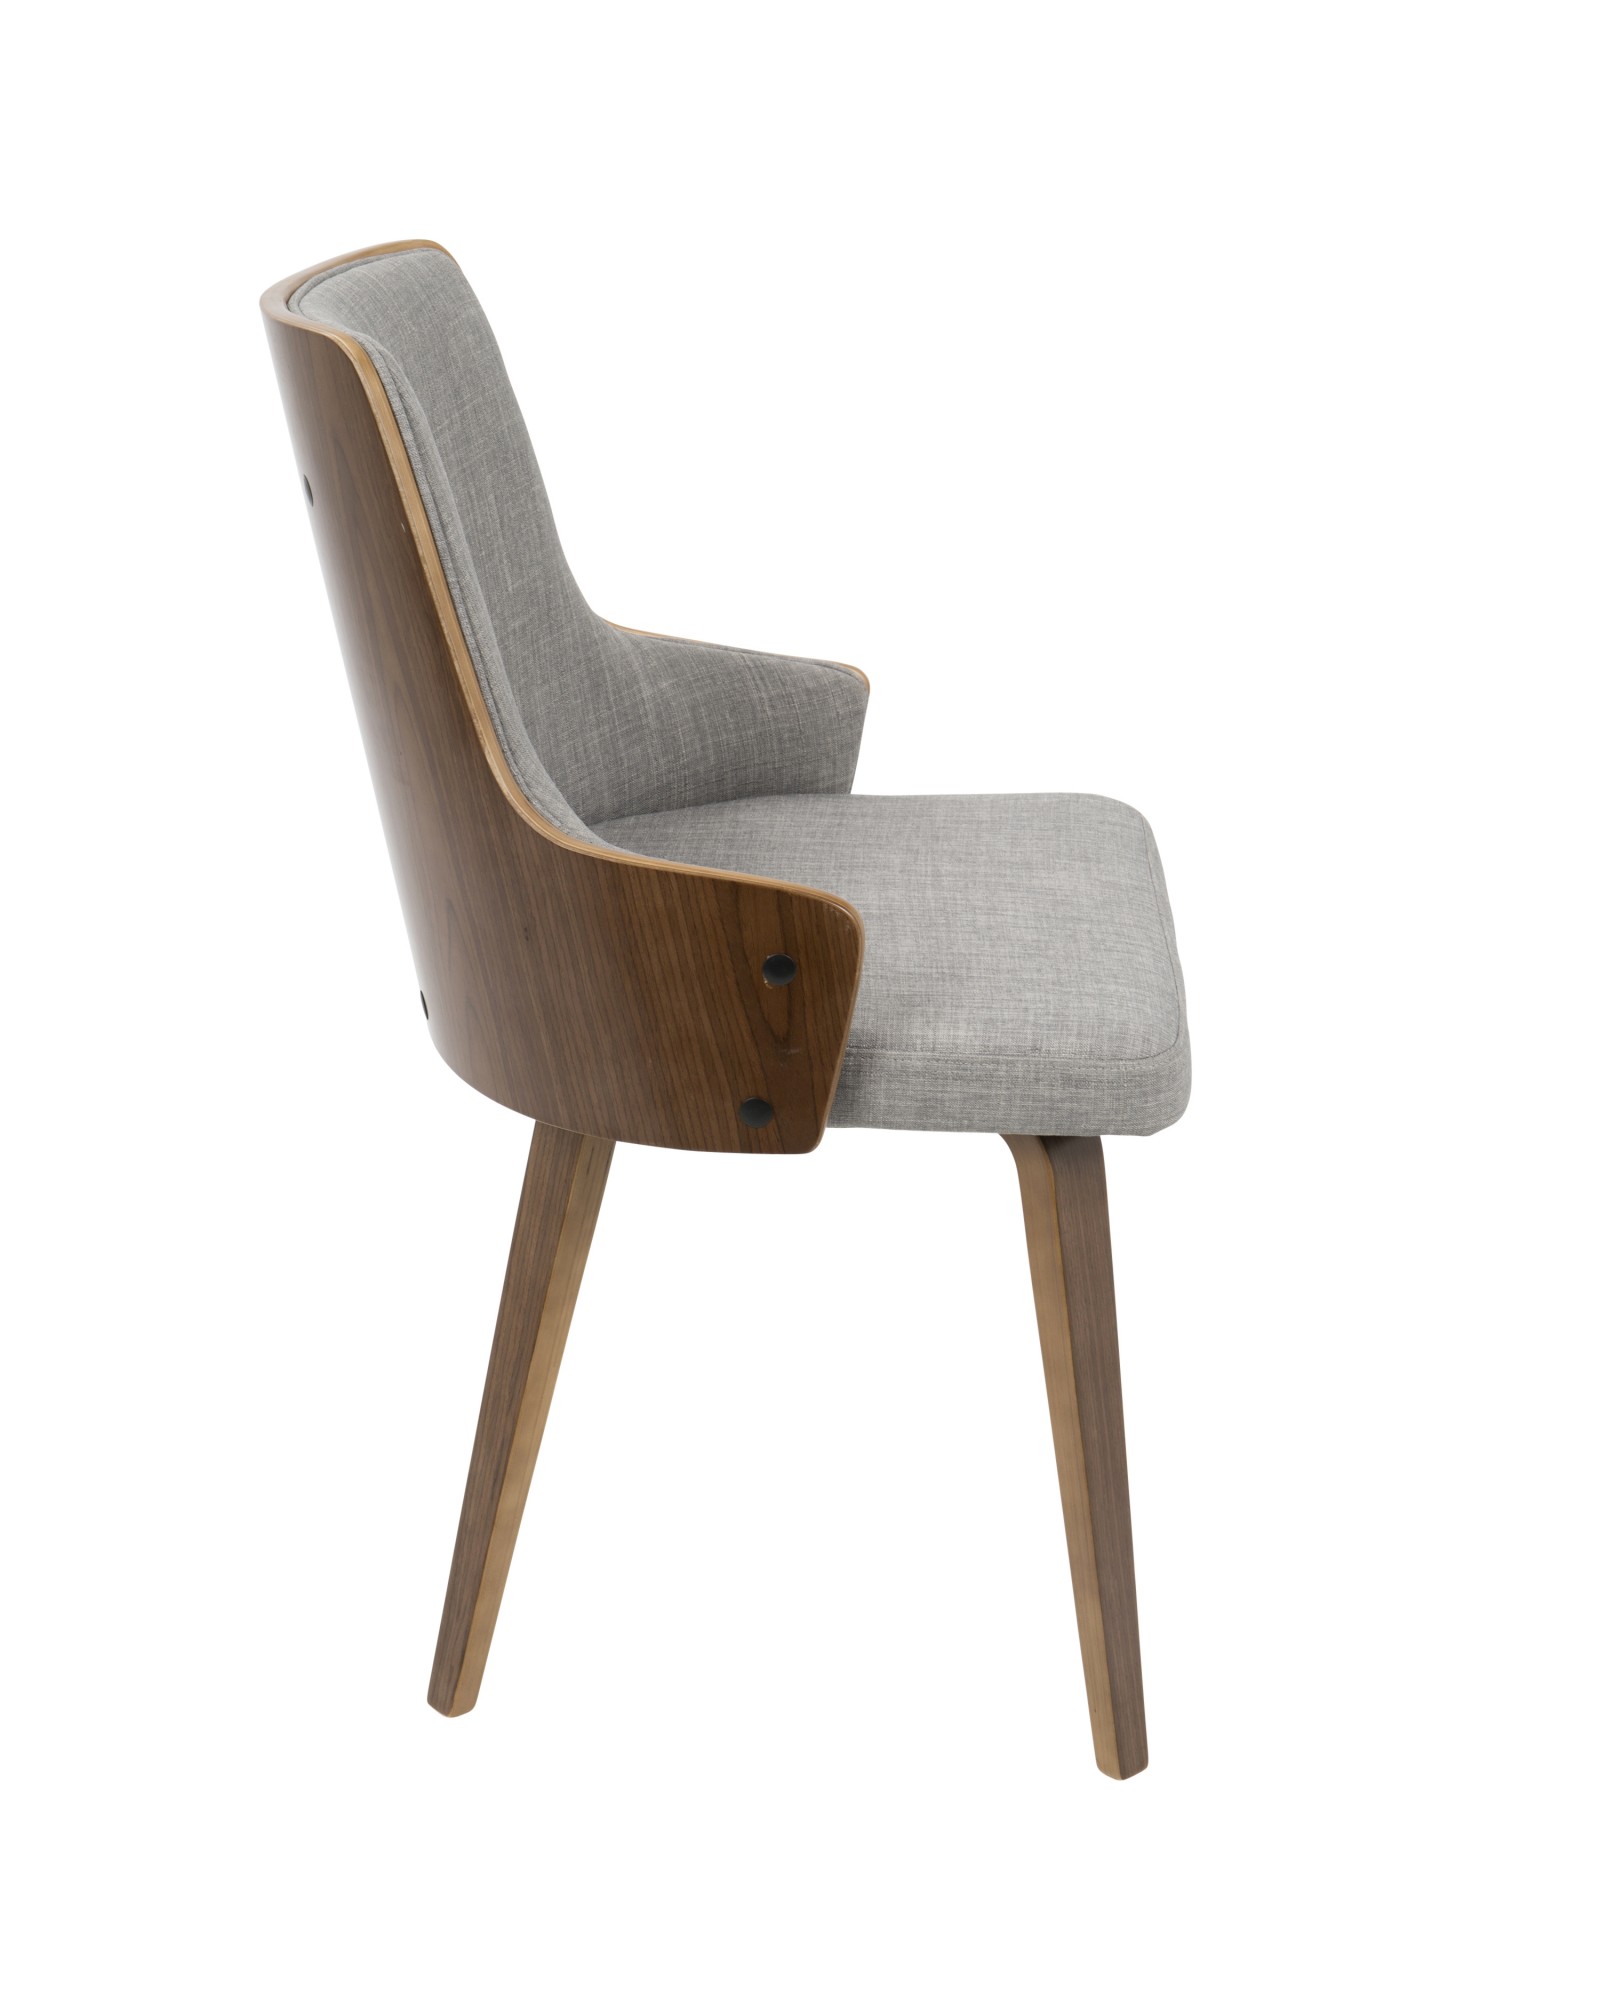 Stella Mid-Century Modern Dining/Accent Chair in Walnut with Light Grey Fabric - Set of 2